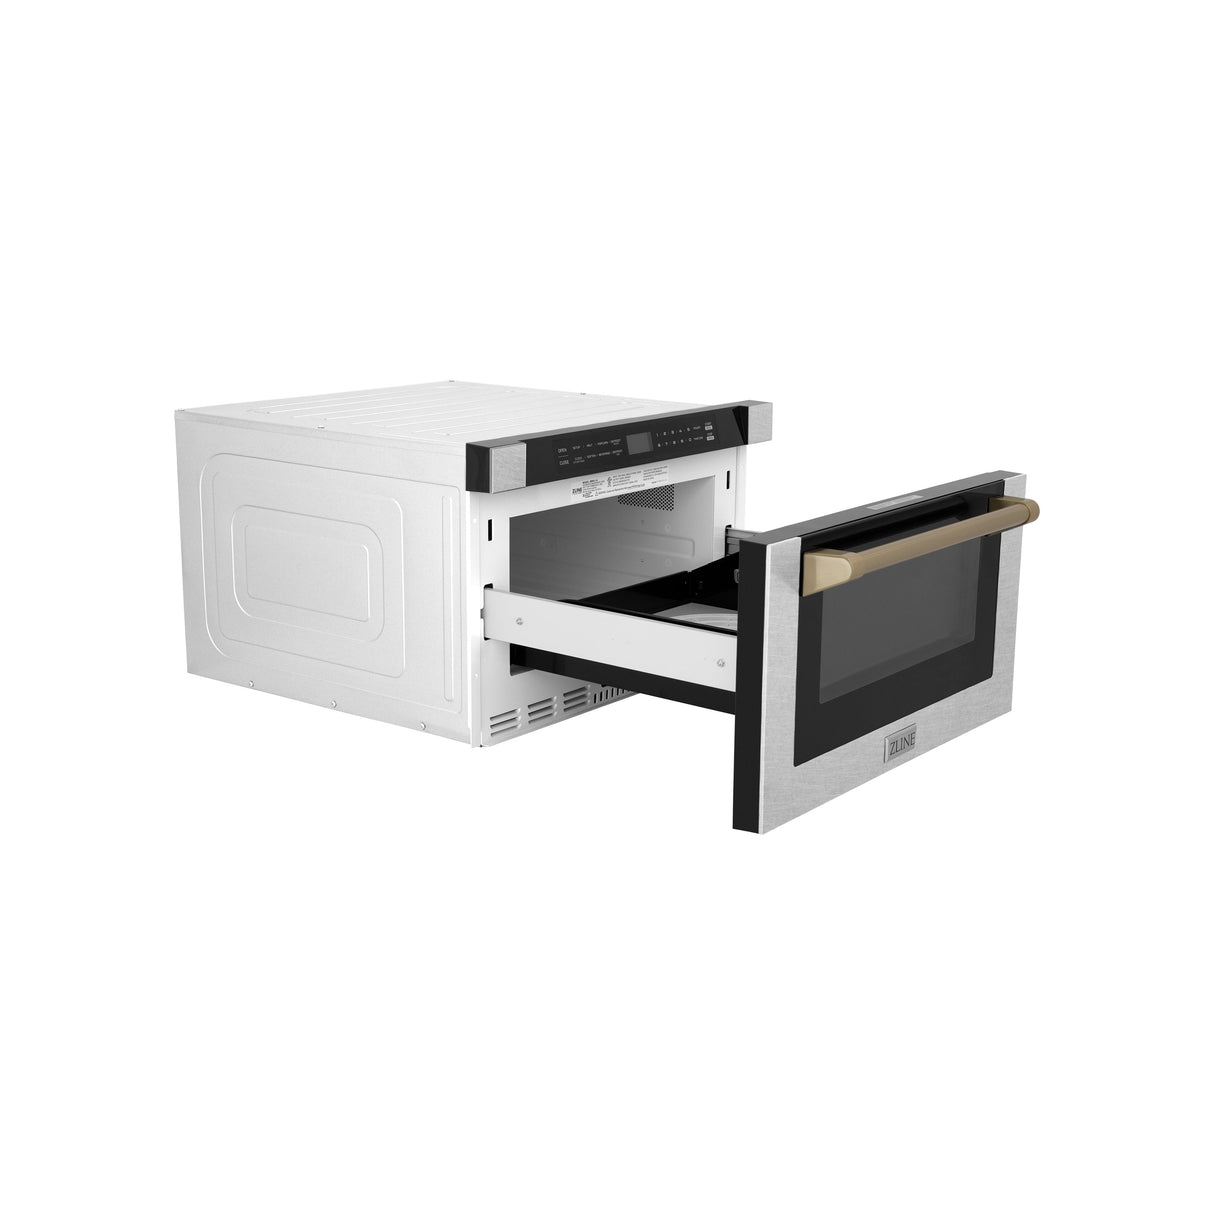 ZLINE Autograph Edition 24 in. Microwave in Fingerprint Resistant Stainless Steel with Traditional Handles and Champagne Bronze Accents (MWDZ-1-SS-H-CB)